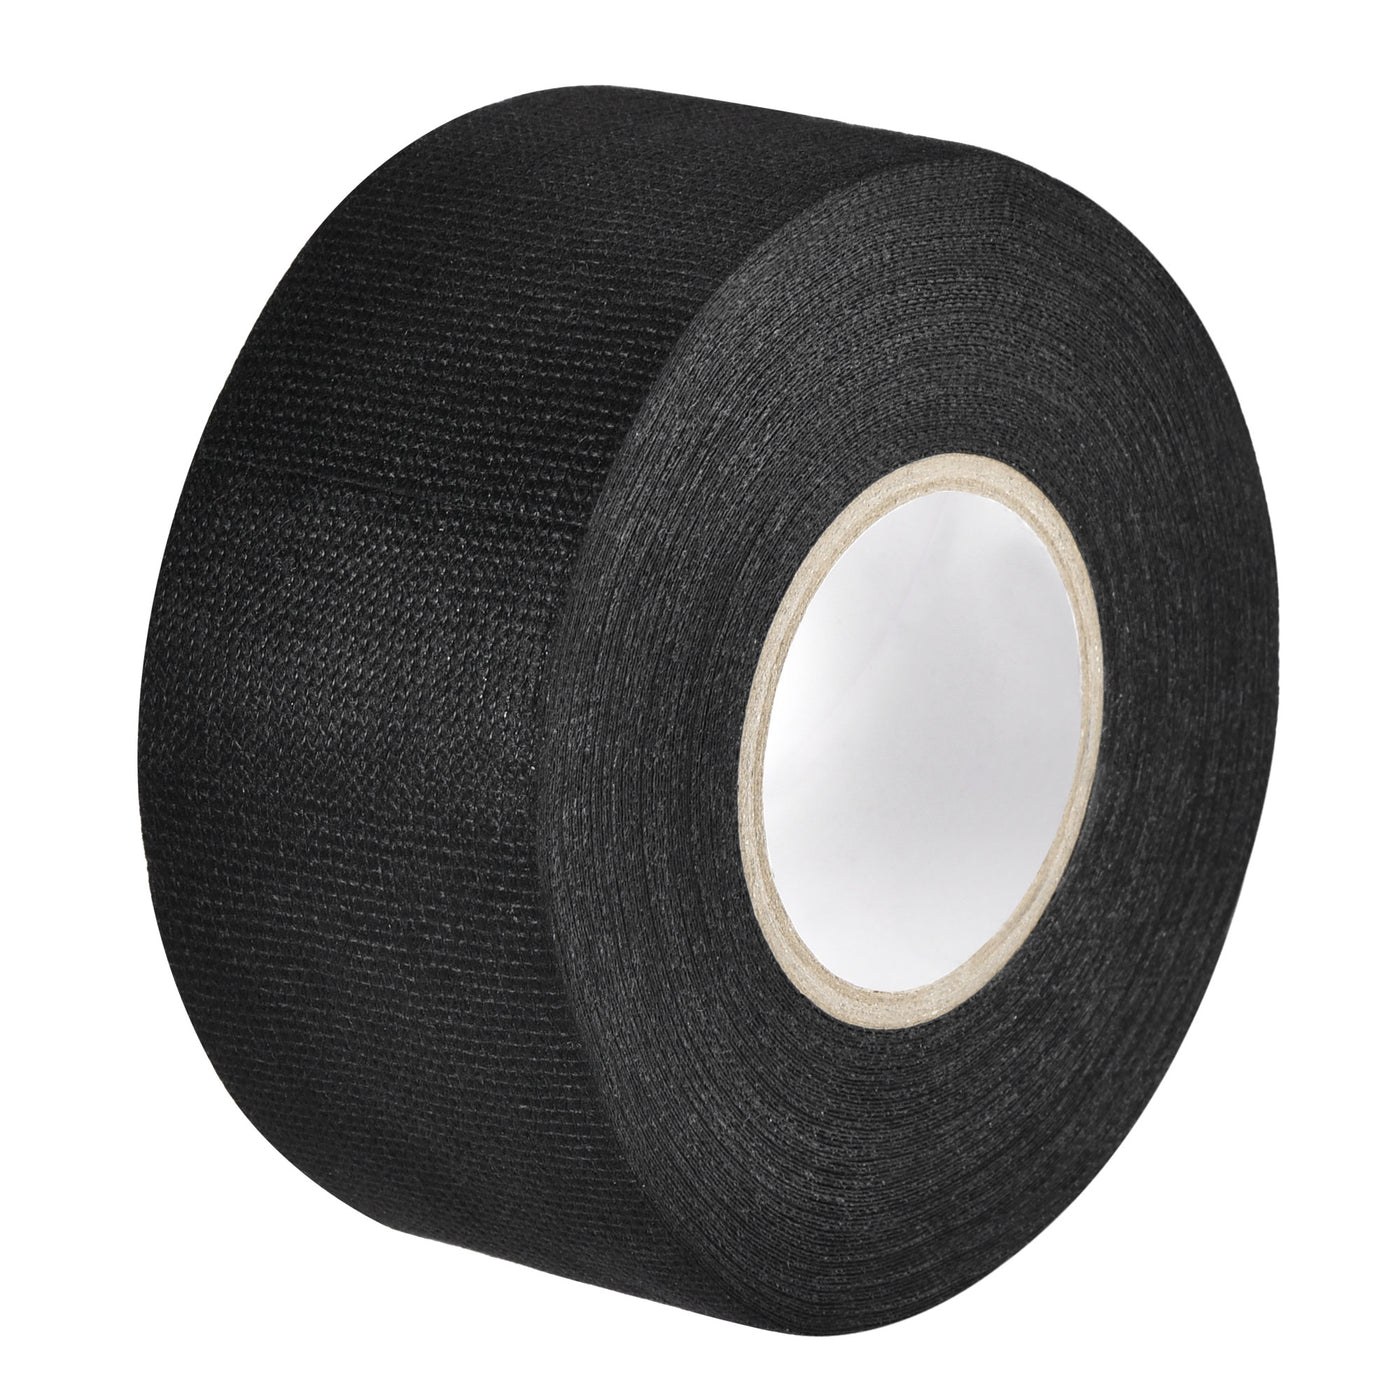 uxcell Uxcell Adhesive Cloth Fabric Tape Wire Harness Looms Single-Side 40mm x 15m Black